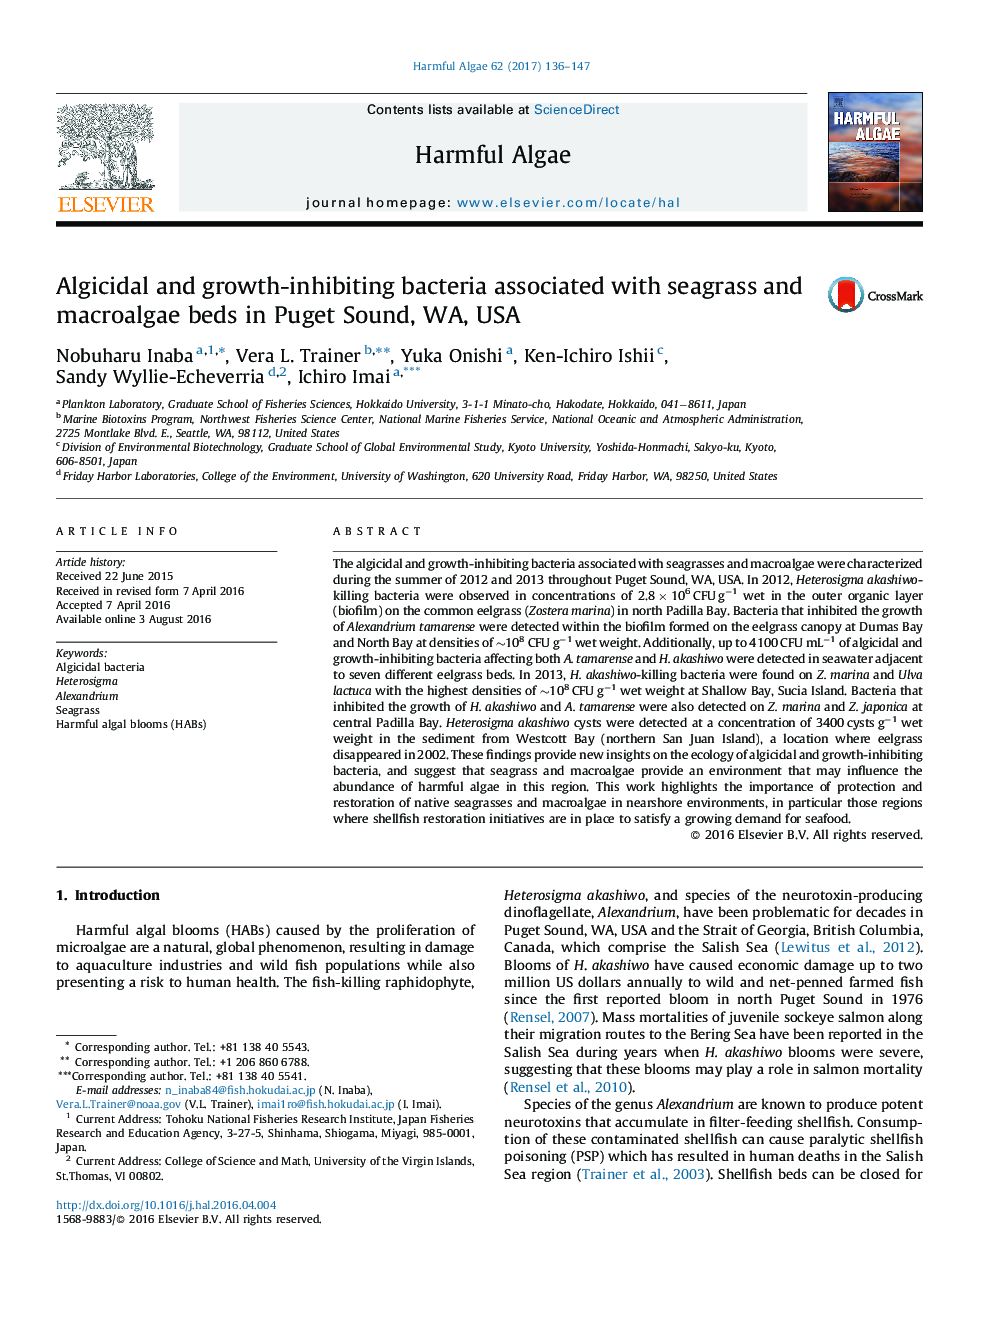 Algicidal and growth-inhibiting bacteria associated with seagrass and macroalgae beds in Puget Sound, WA, USA